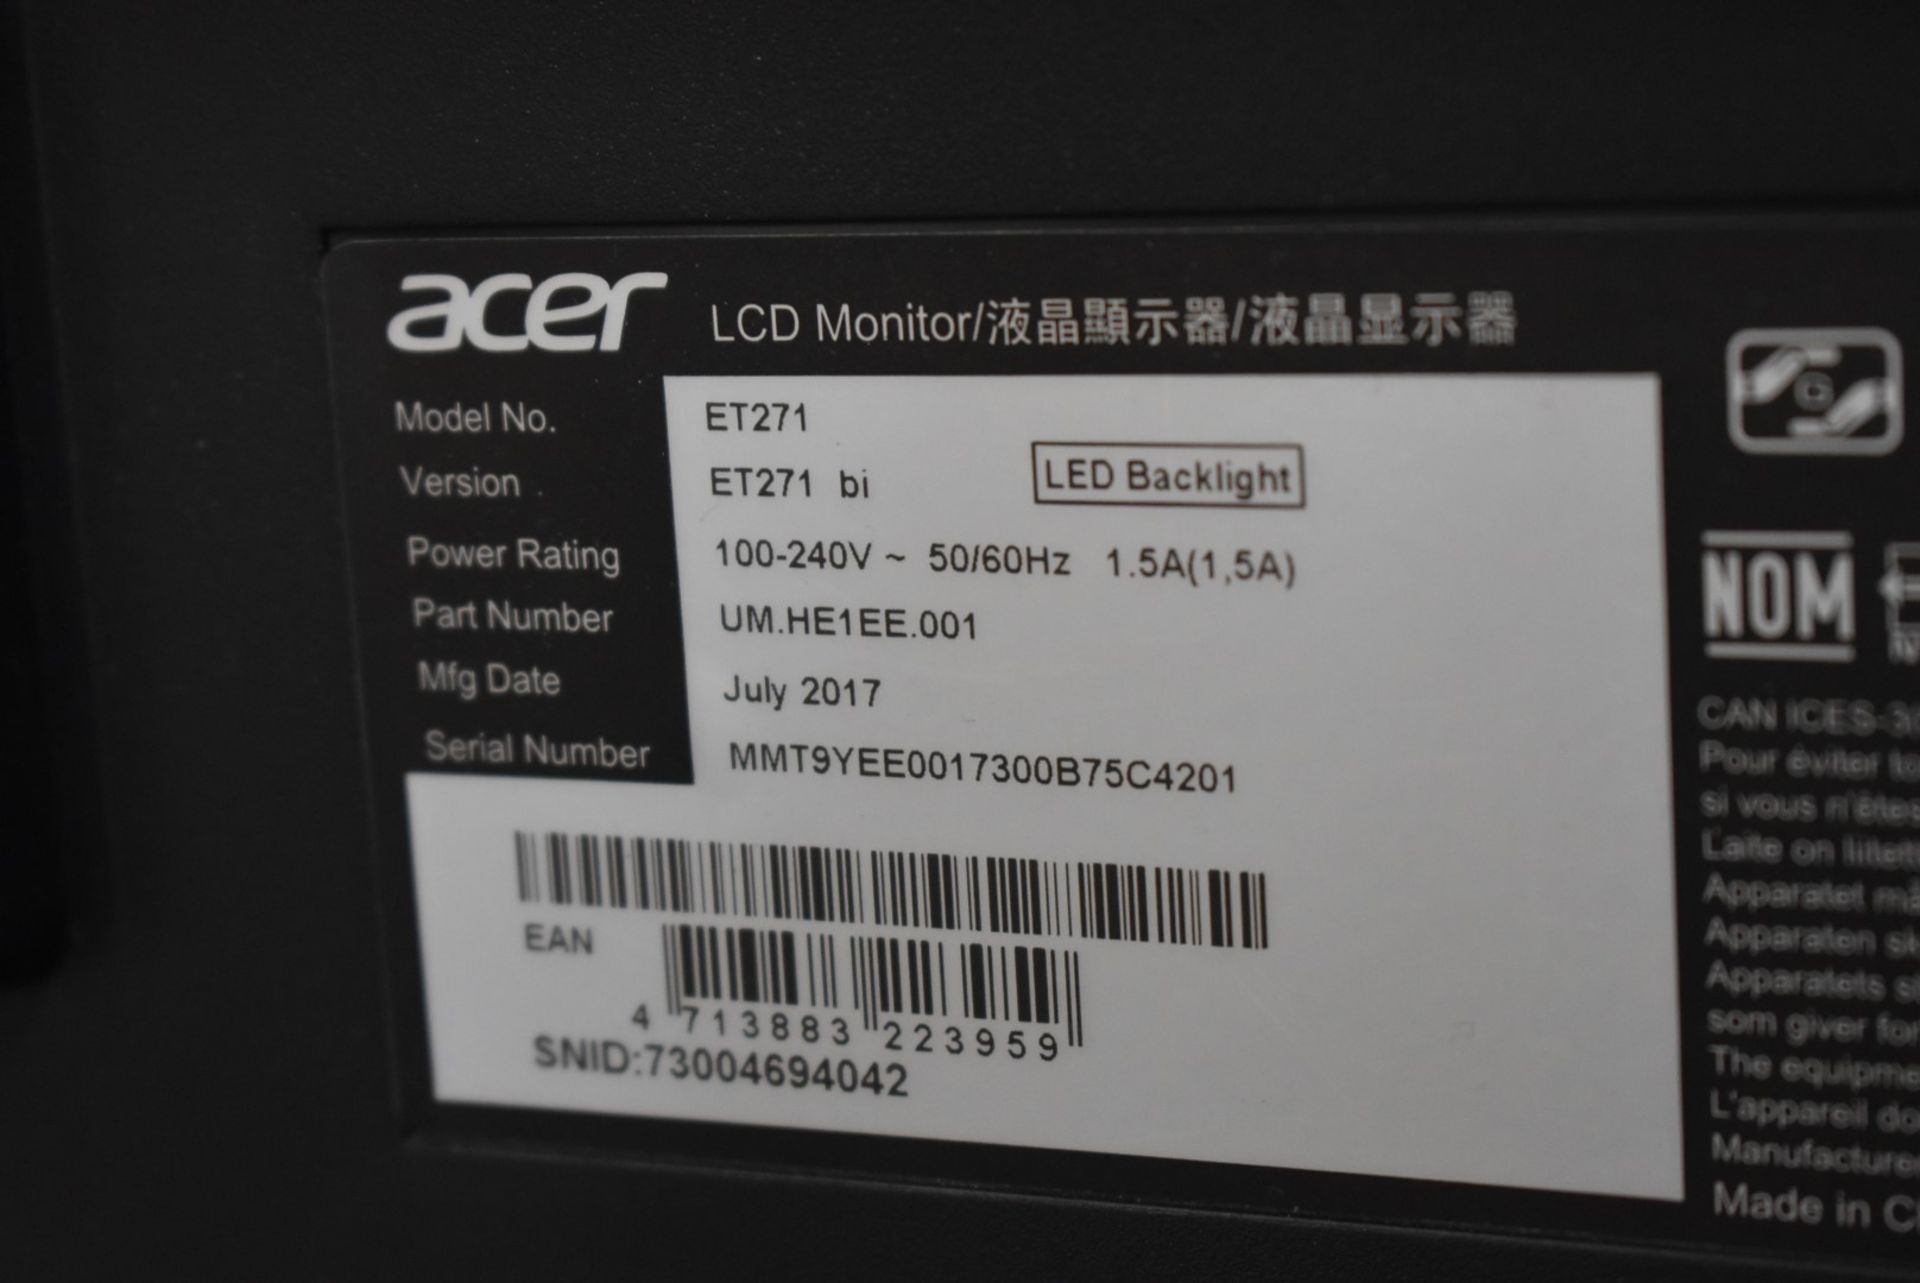 1 x Acer 27 Inch FHD Computer Monitor - Model ET271 - Features 1920 x 1080 Resolution, 4ms - Image 2 of 2